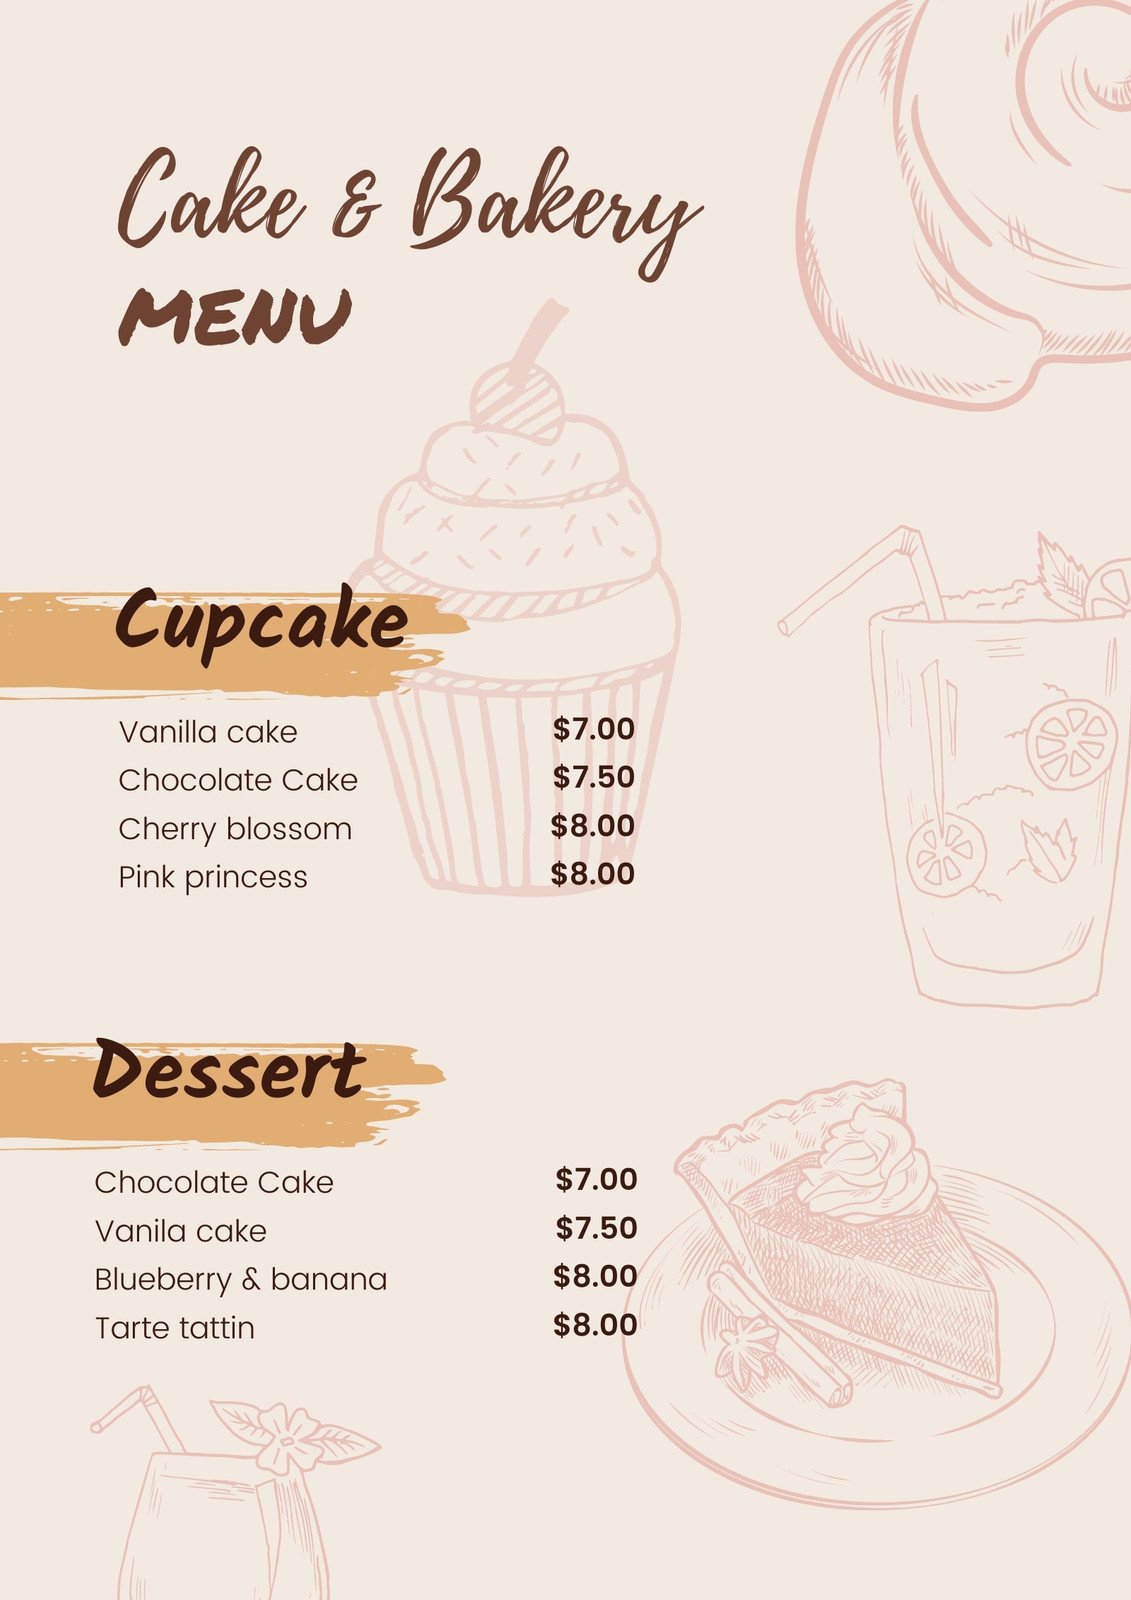 Free and customizable delectable bakery menu templates | Canva